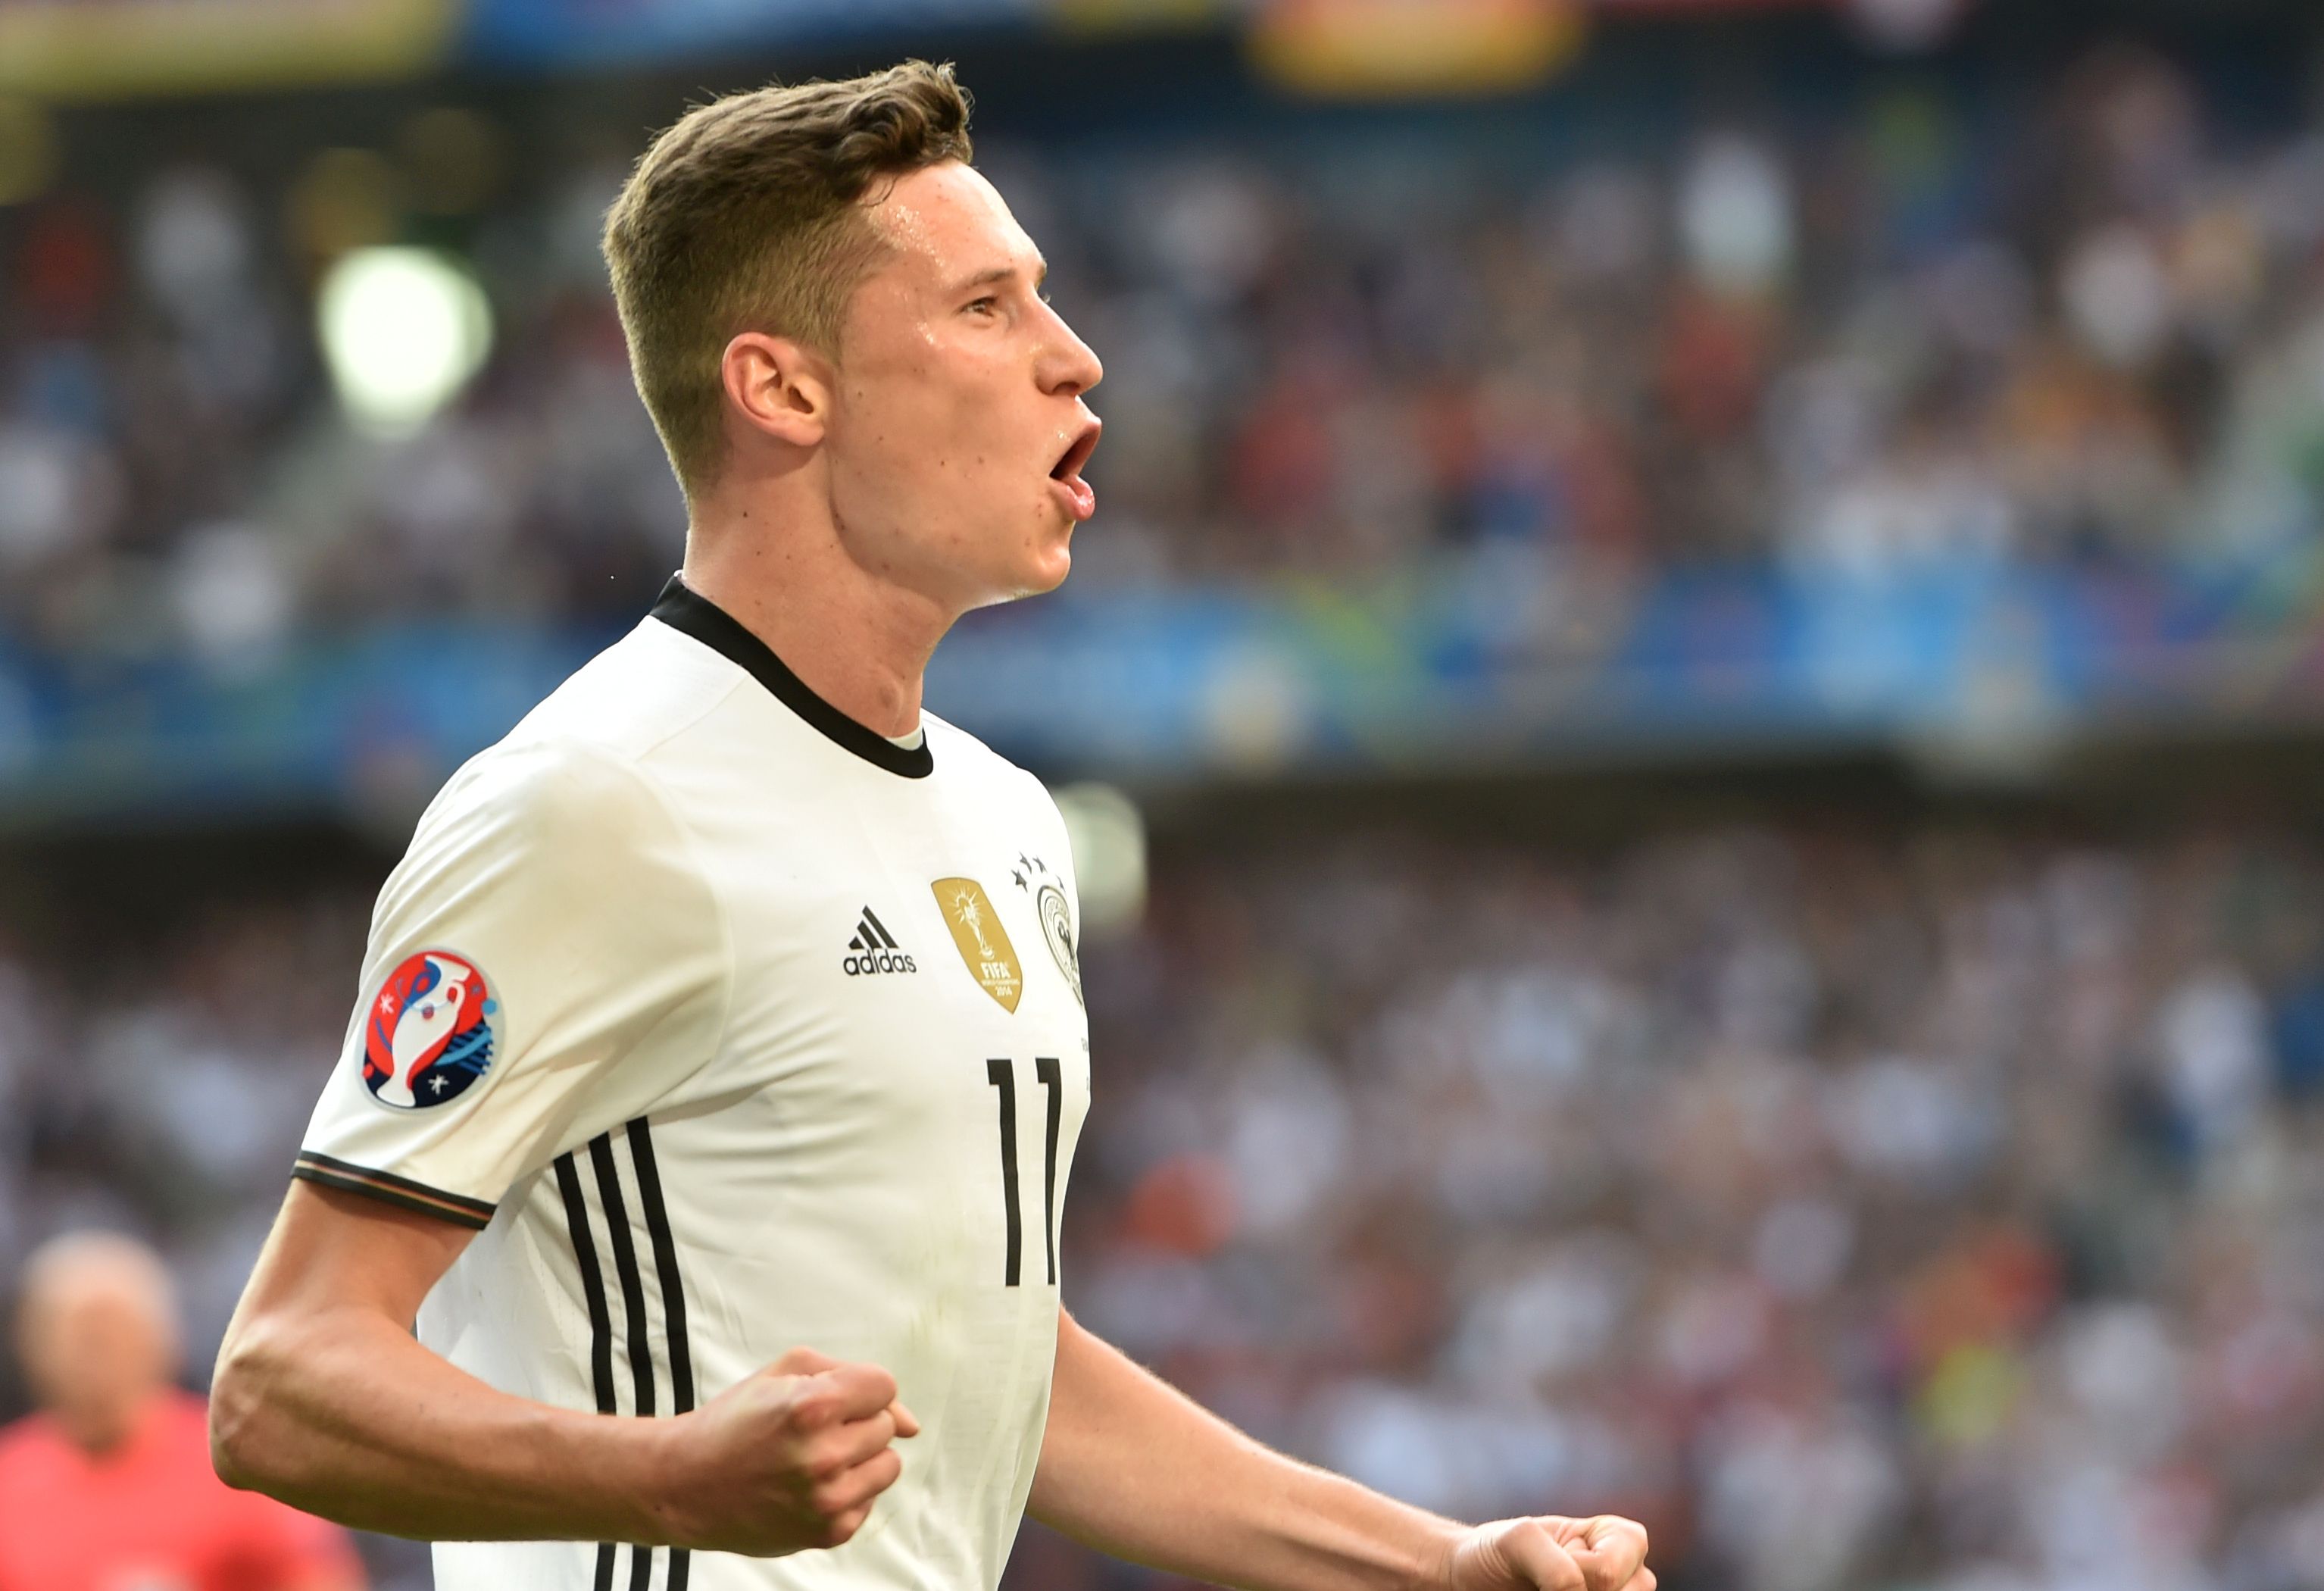 Euro 2016: Germany's Draxler is missing piece in Loew's puzzle